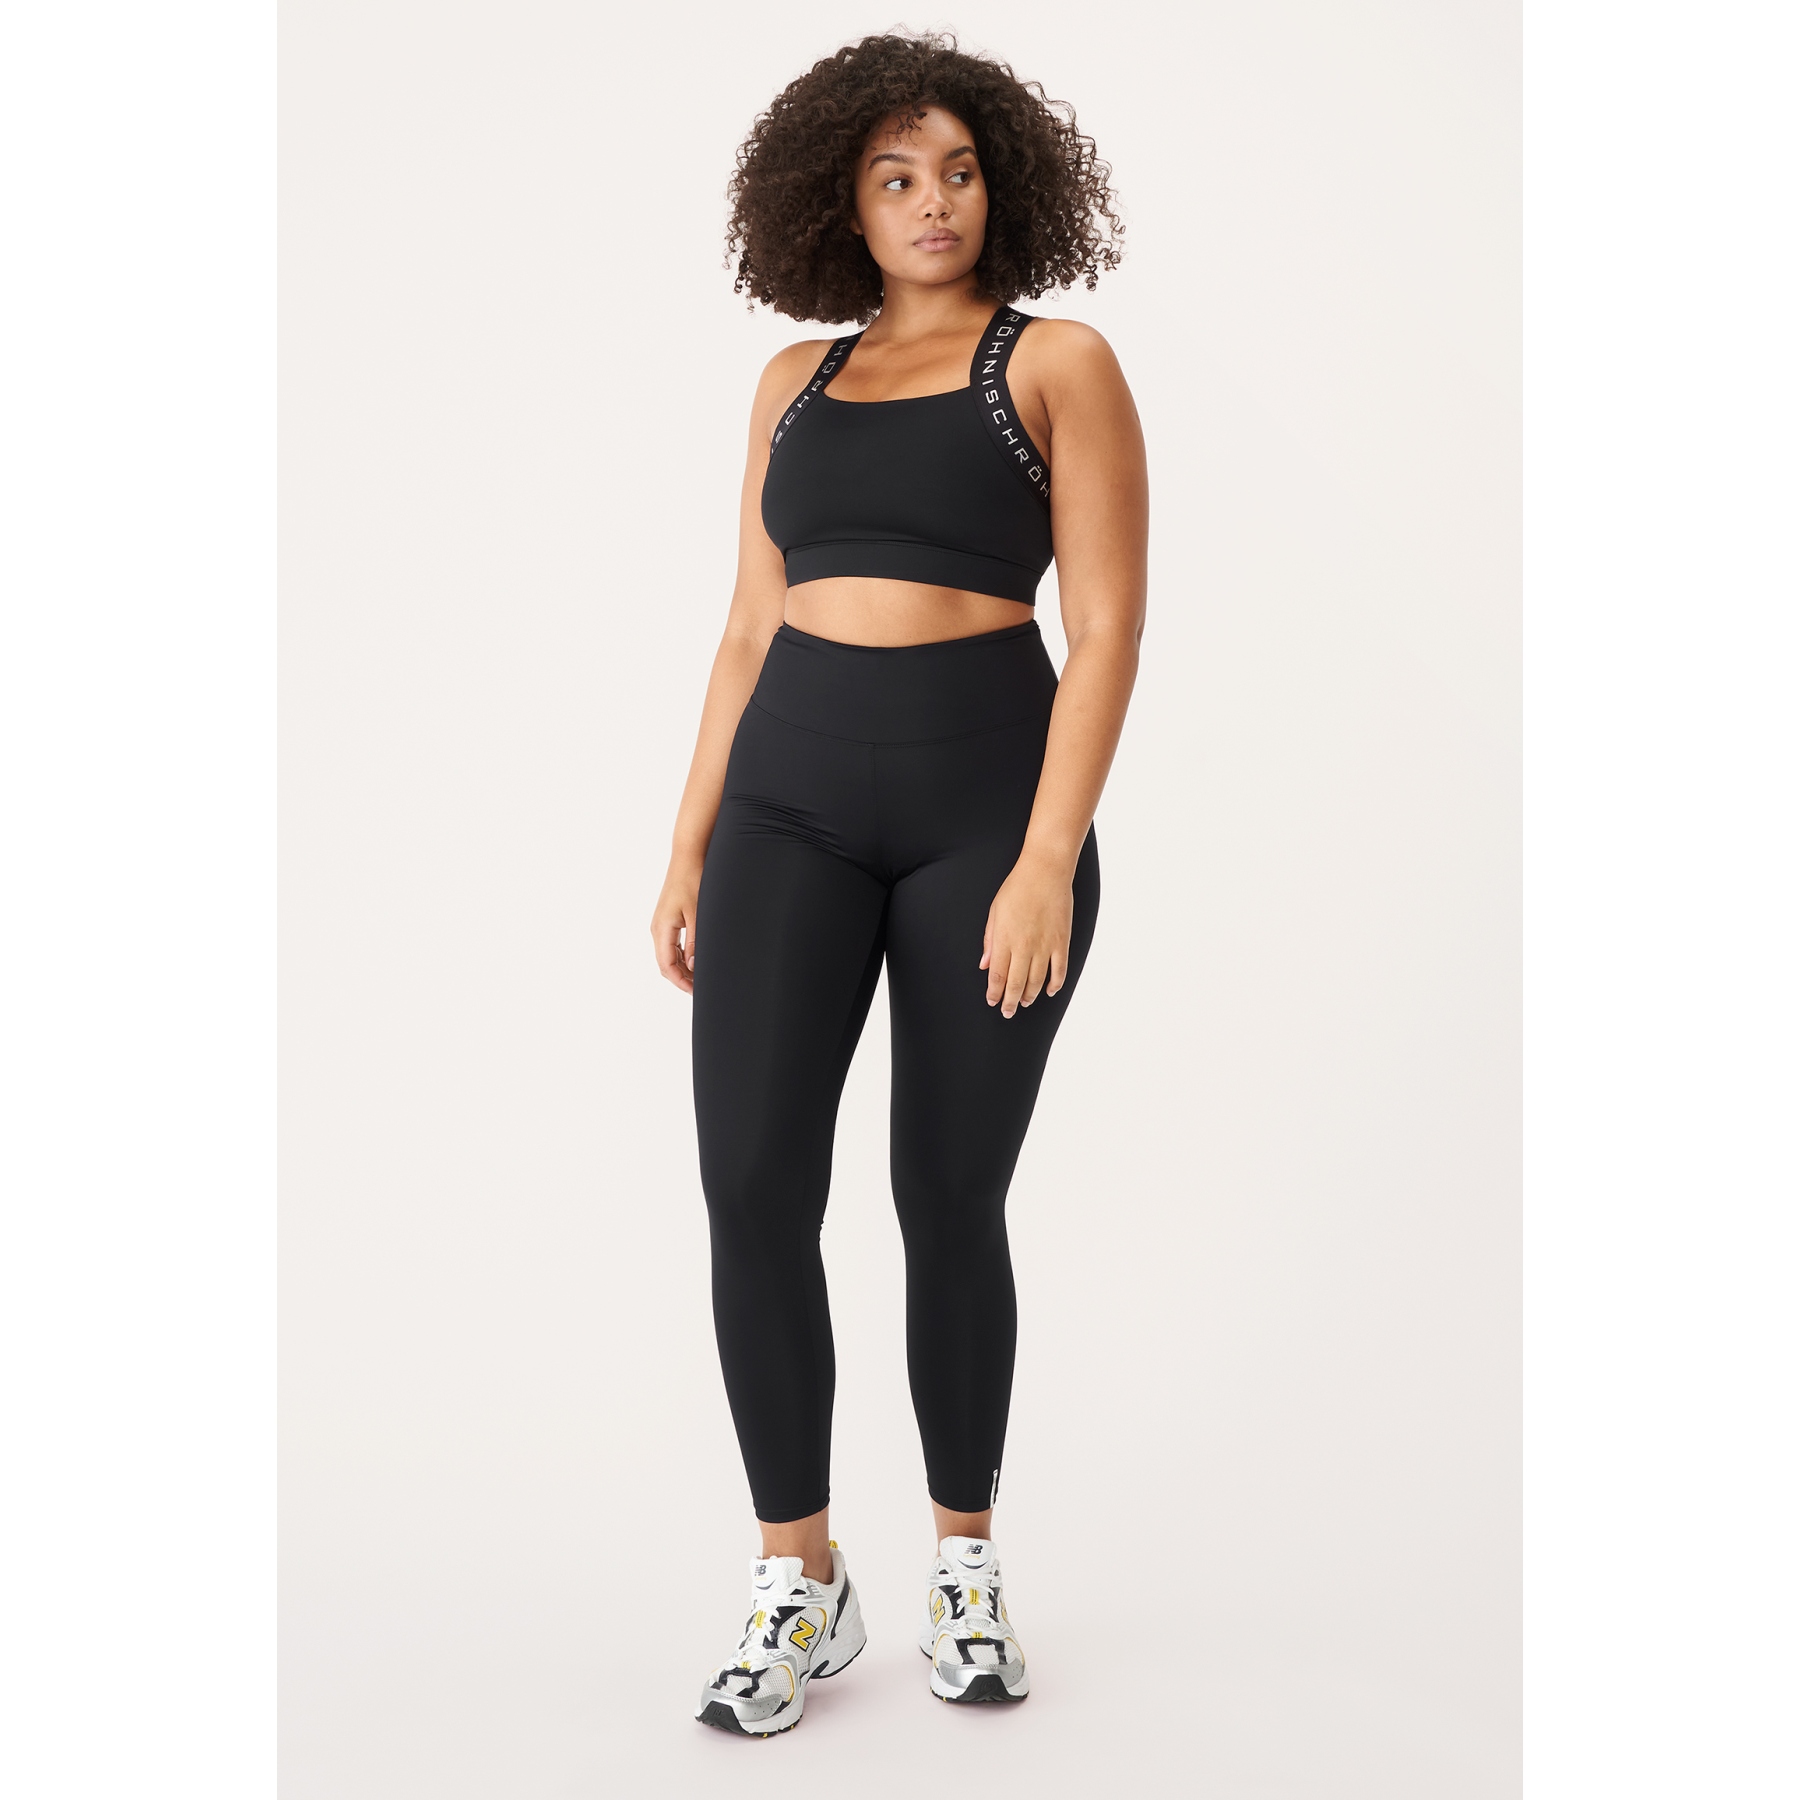 Fitness High-Waisted Shaping Cropped Leggings, Black